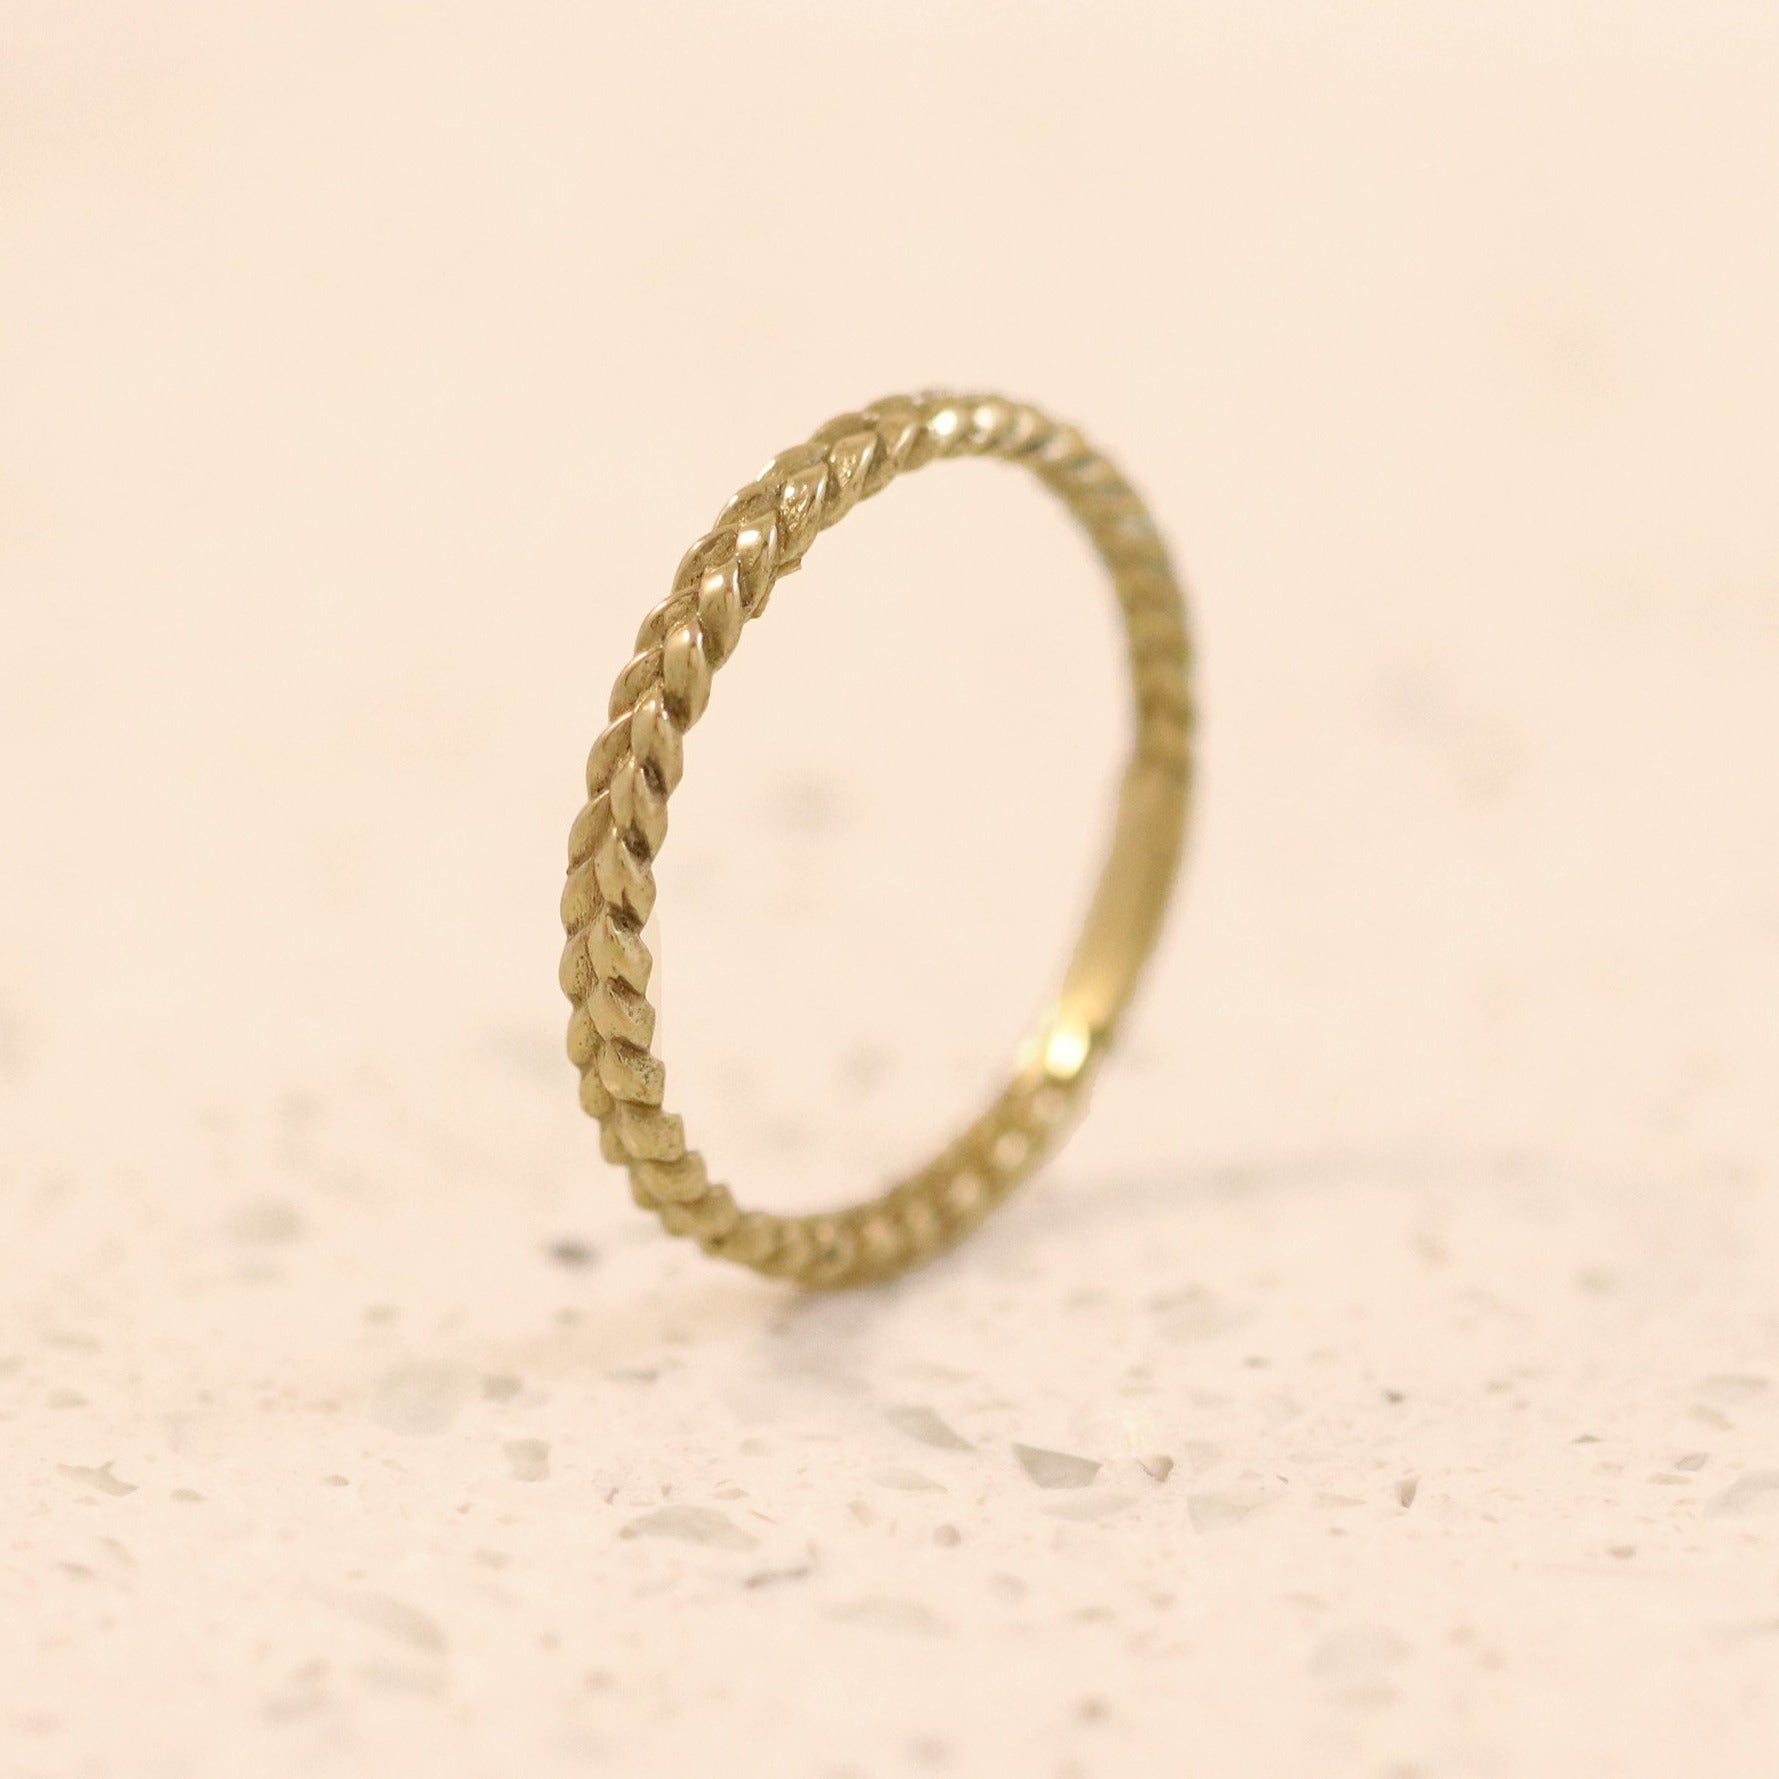 Jasmine Pure Woven Ring in Gold